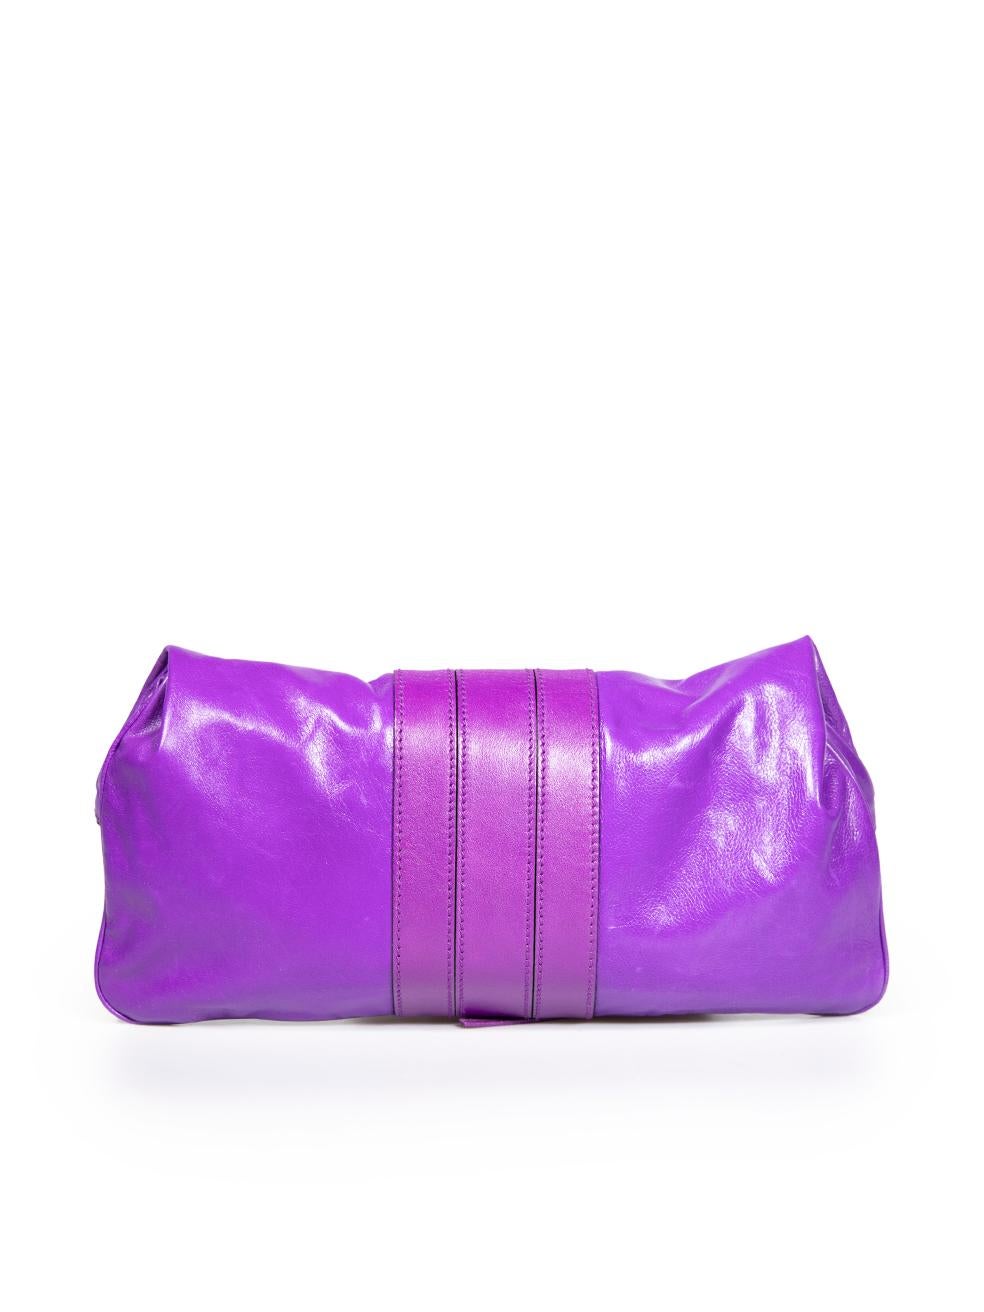 Gucci Purple Leather Bamboo Turnlock Lucy Clutch In Excellent Condition For Sale In London, GB